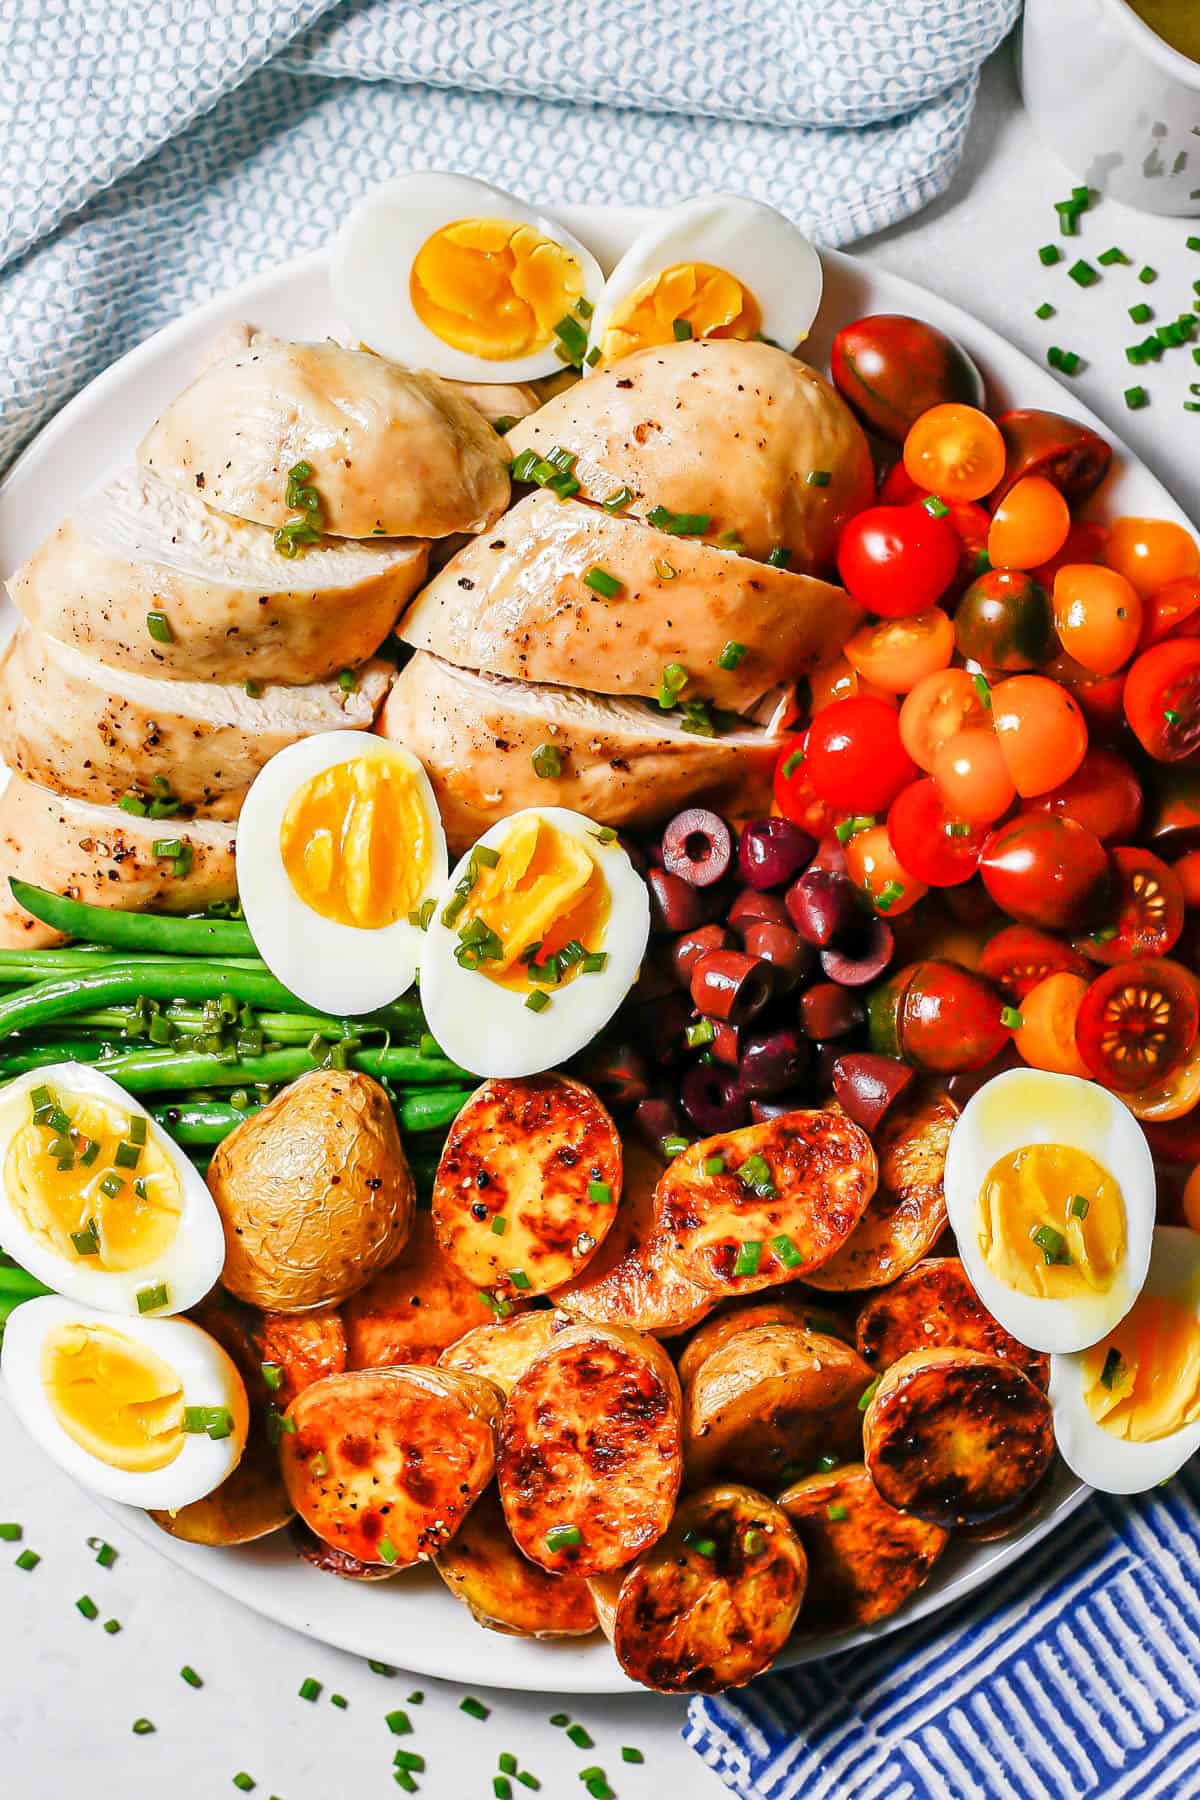 Roast chicken Niçoise salad on a large round white platter with tomatoes, olives, eggs, potatoes and haricot verts.